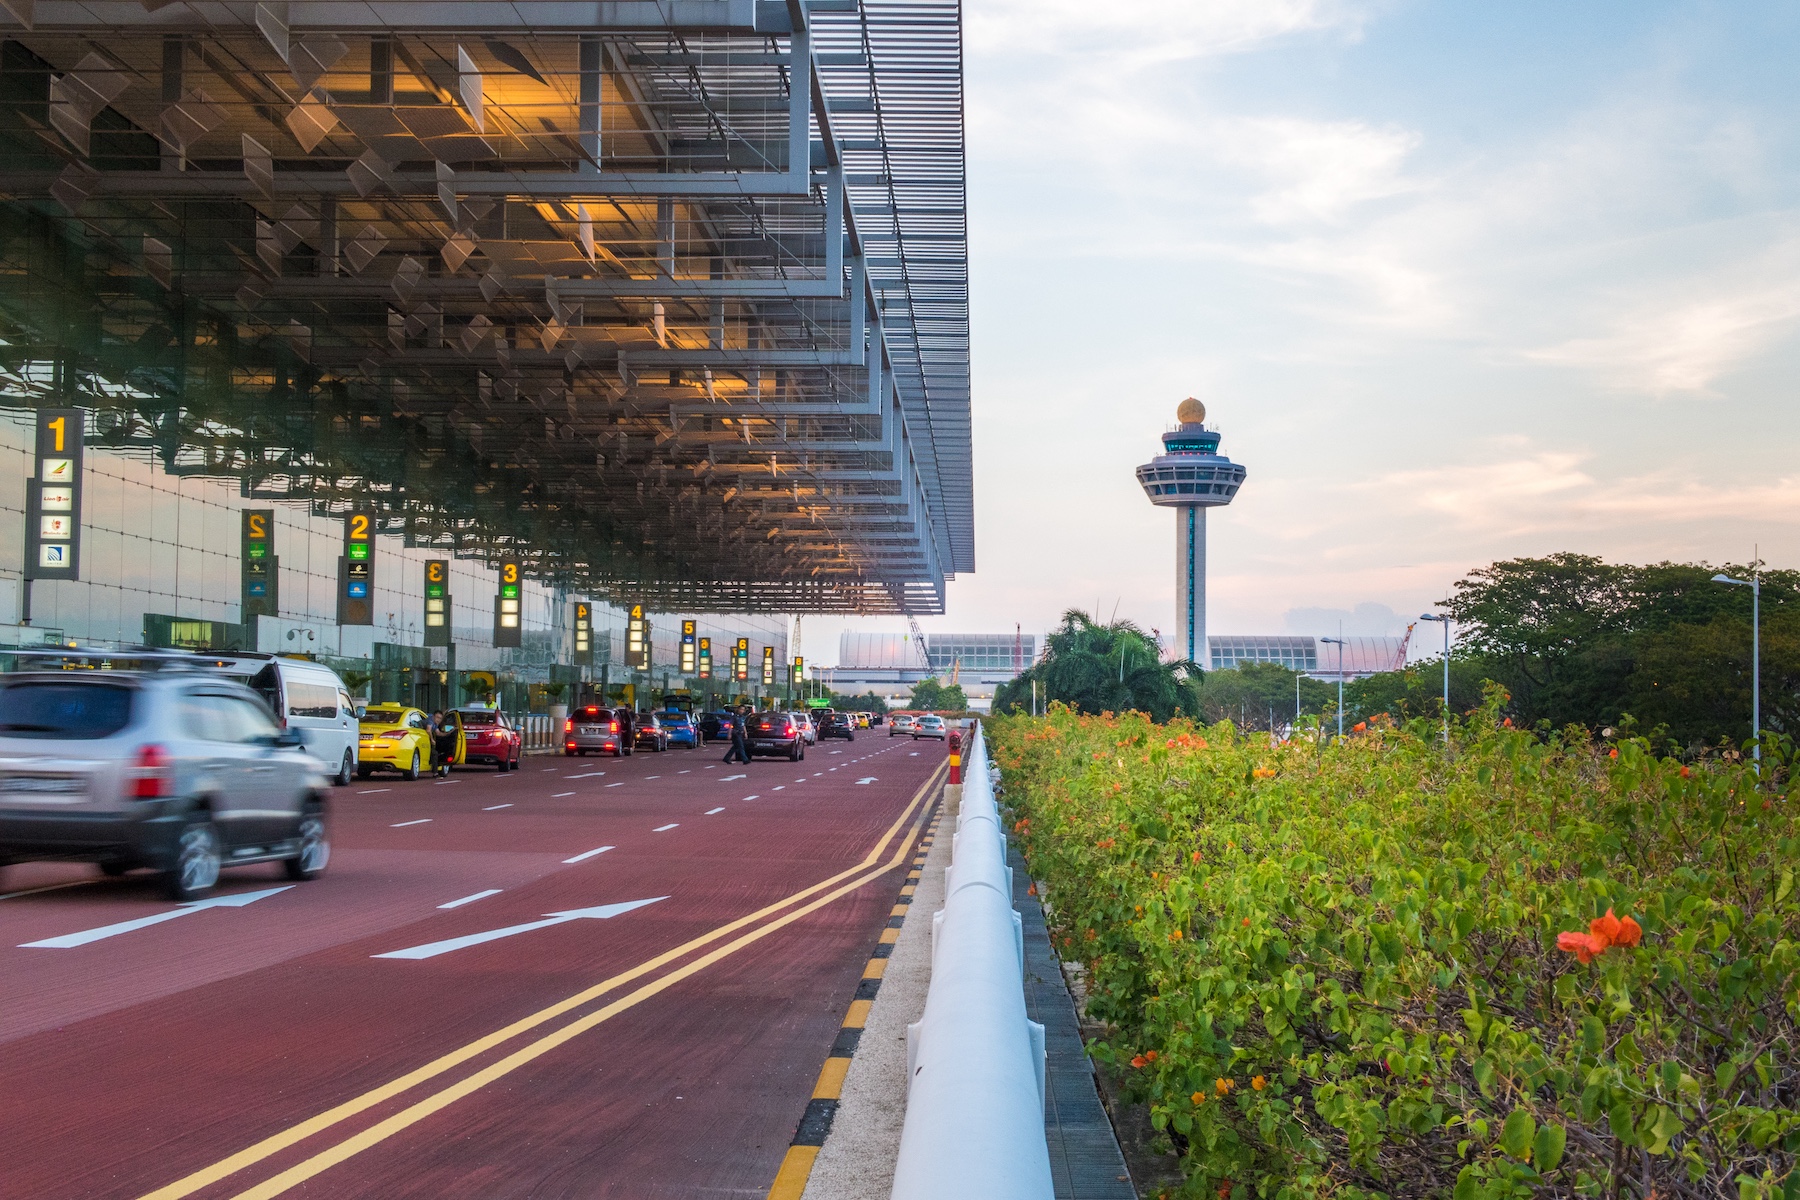 Driving lanes and drop-off spots for taxi and motor vehicle at Changi Terminal 3 airport

